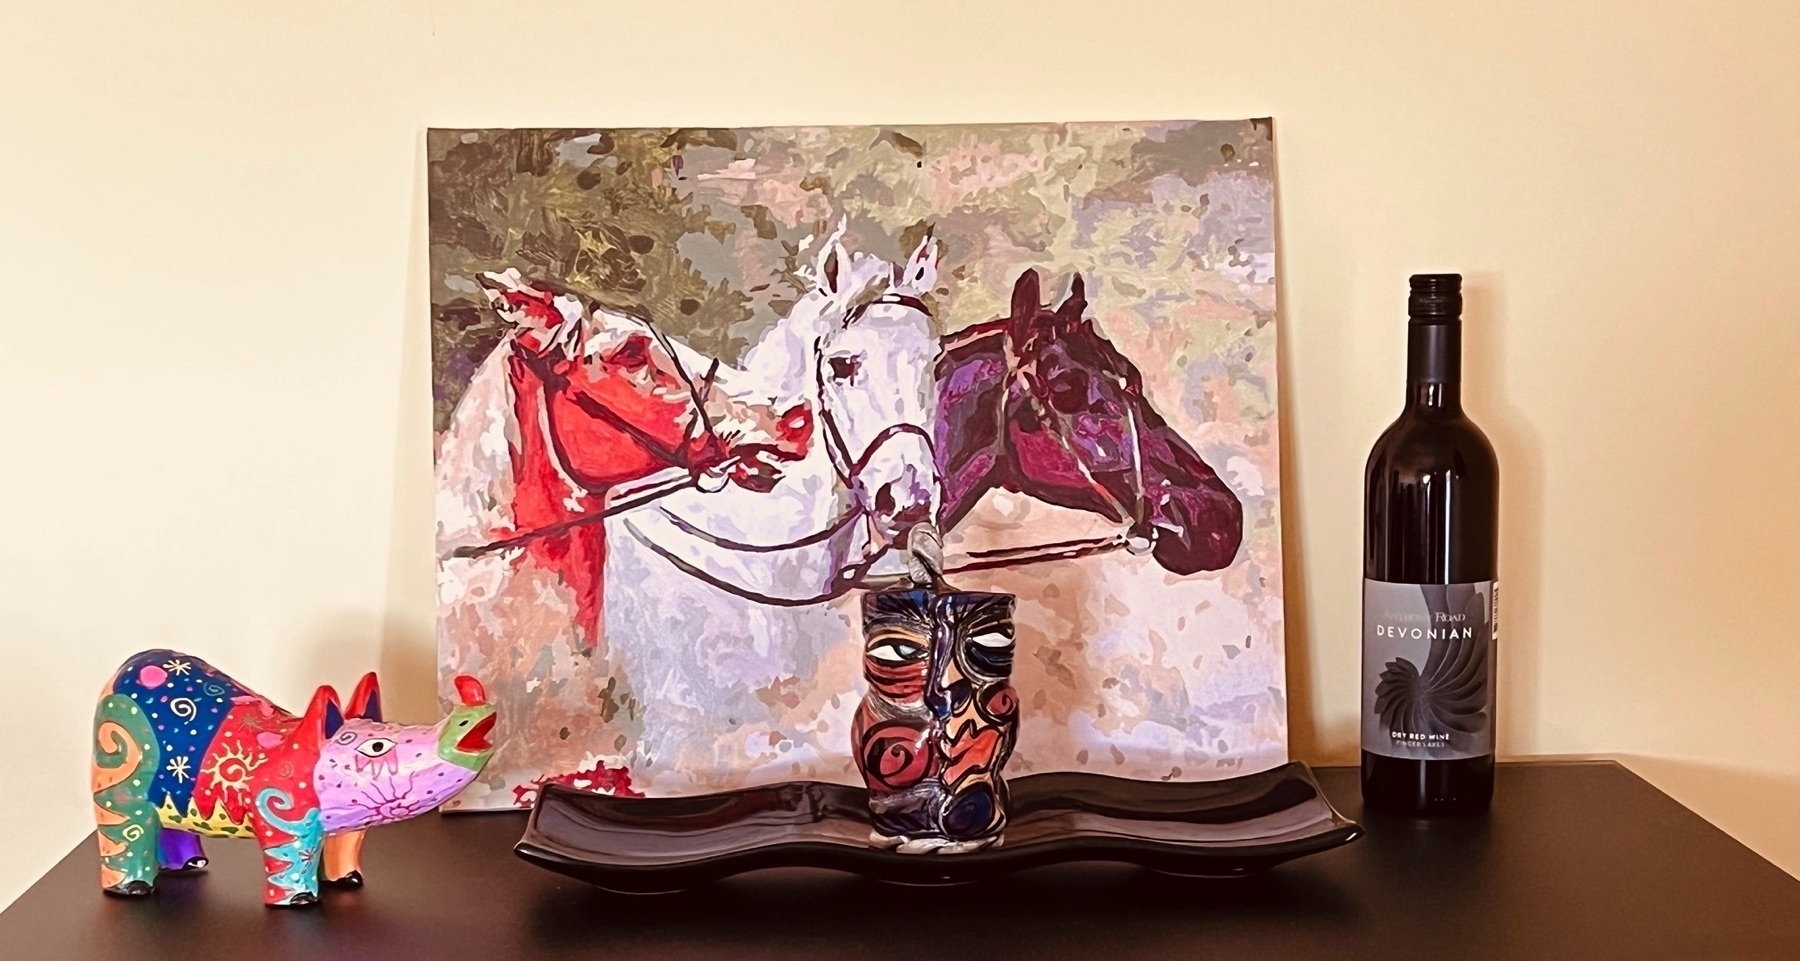 Five objects arranged on top of a liquor cabinet. From left to write: a brightly multi-colored wooden rhinoceros from Indonesia; a handmade mug with a cubist face painted on it (the mug is positioned so the handle is behind it); the mug is resting on black display tray; a bottle of red wine from the NYS Lake District; in the back, a painting of three horses.